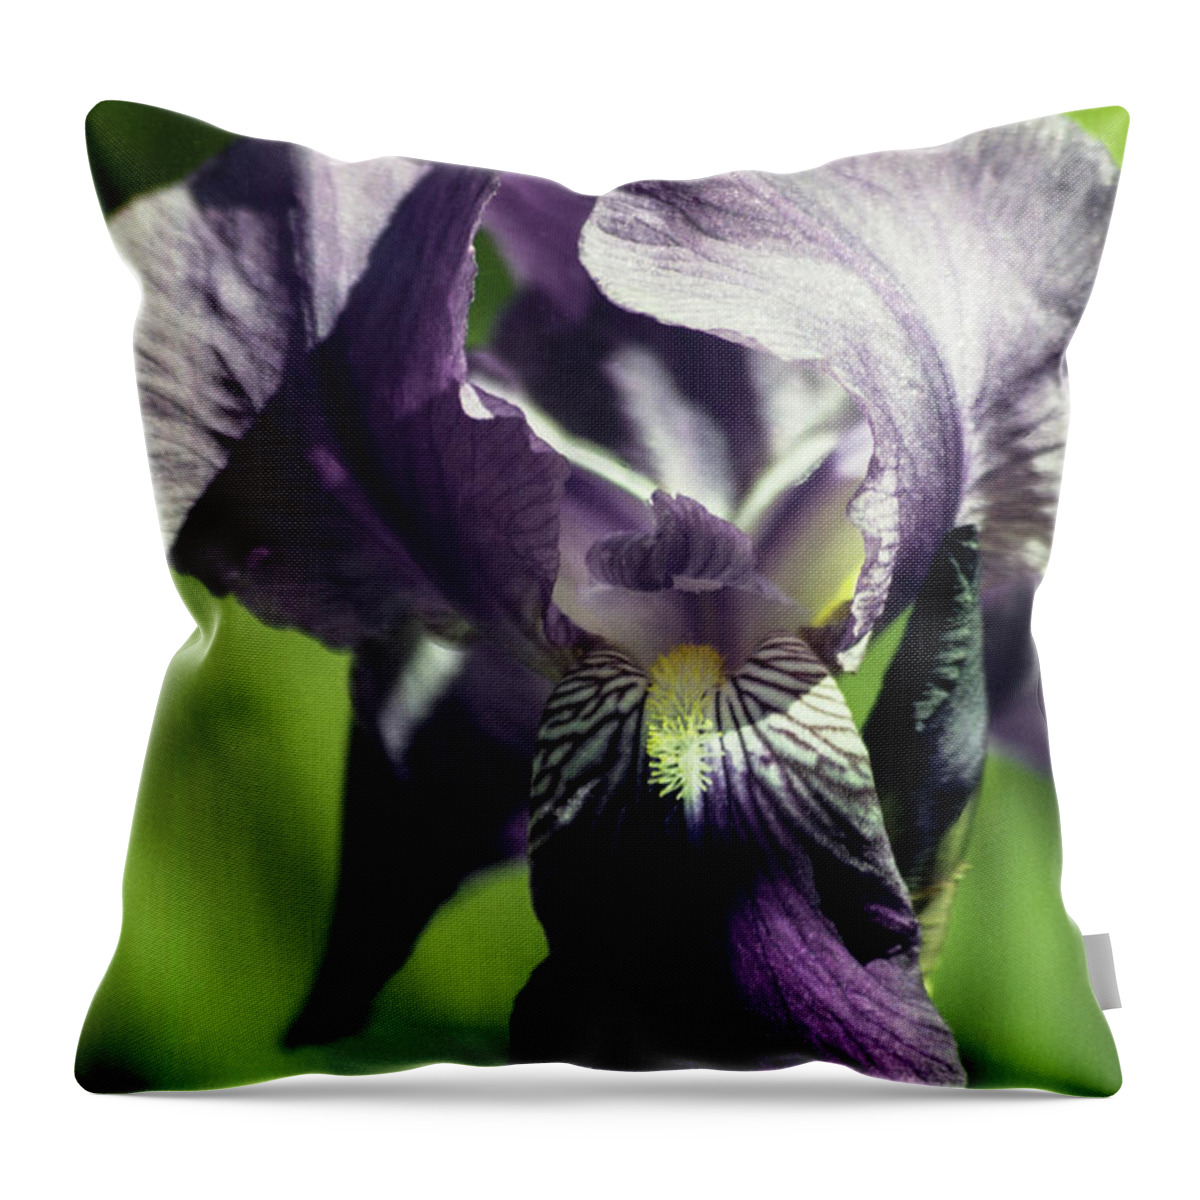 Arizona Throw Pillow featuring the photograph Into the World of the Iris by Kathy McClure